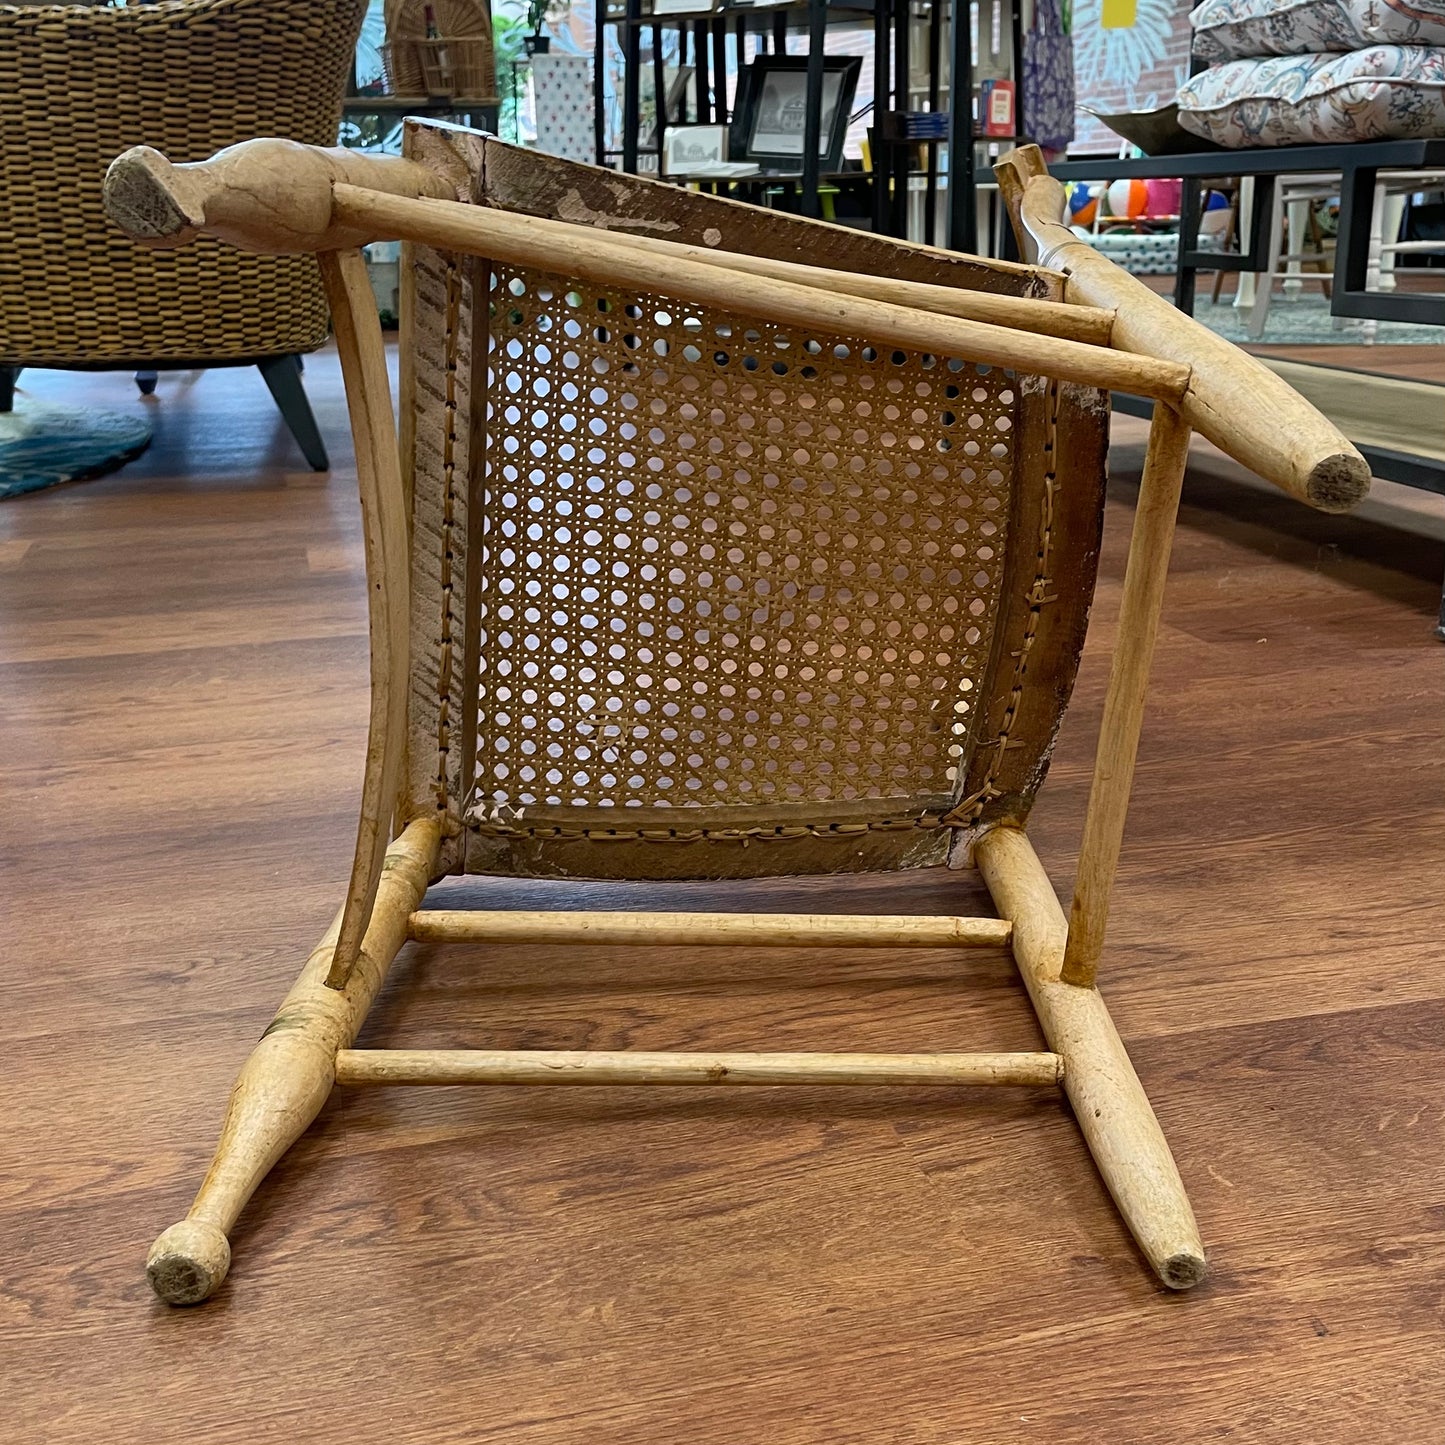 Set of 4 Wooden Bird/Cane Chairs